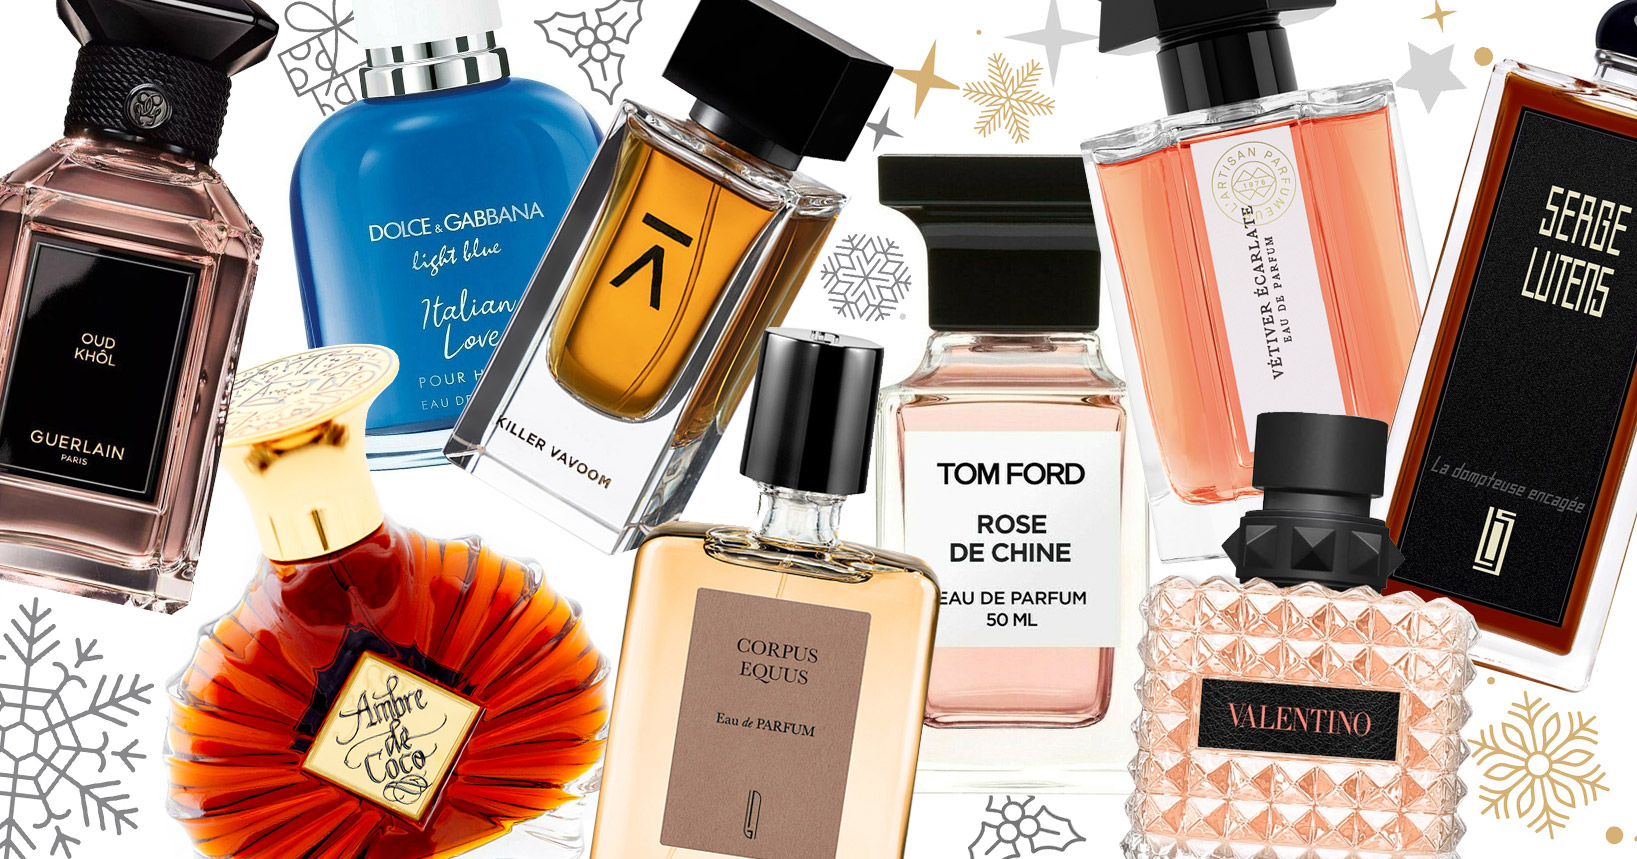 Top 7 Fragrances on Amazon – Your Ultimate Guide to Finding Your Signature Scent